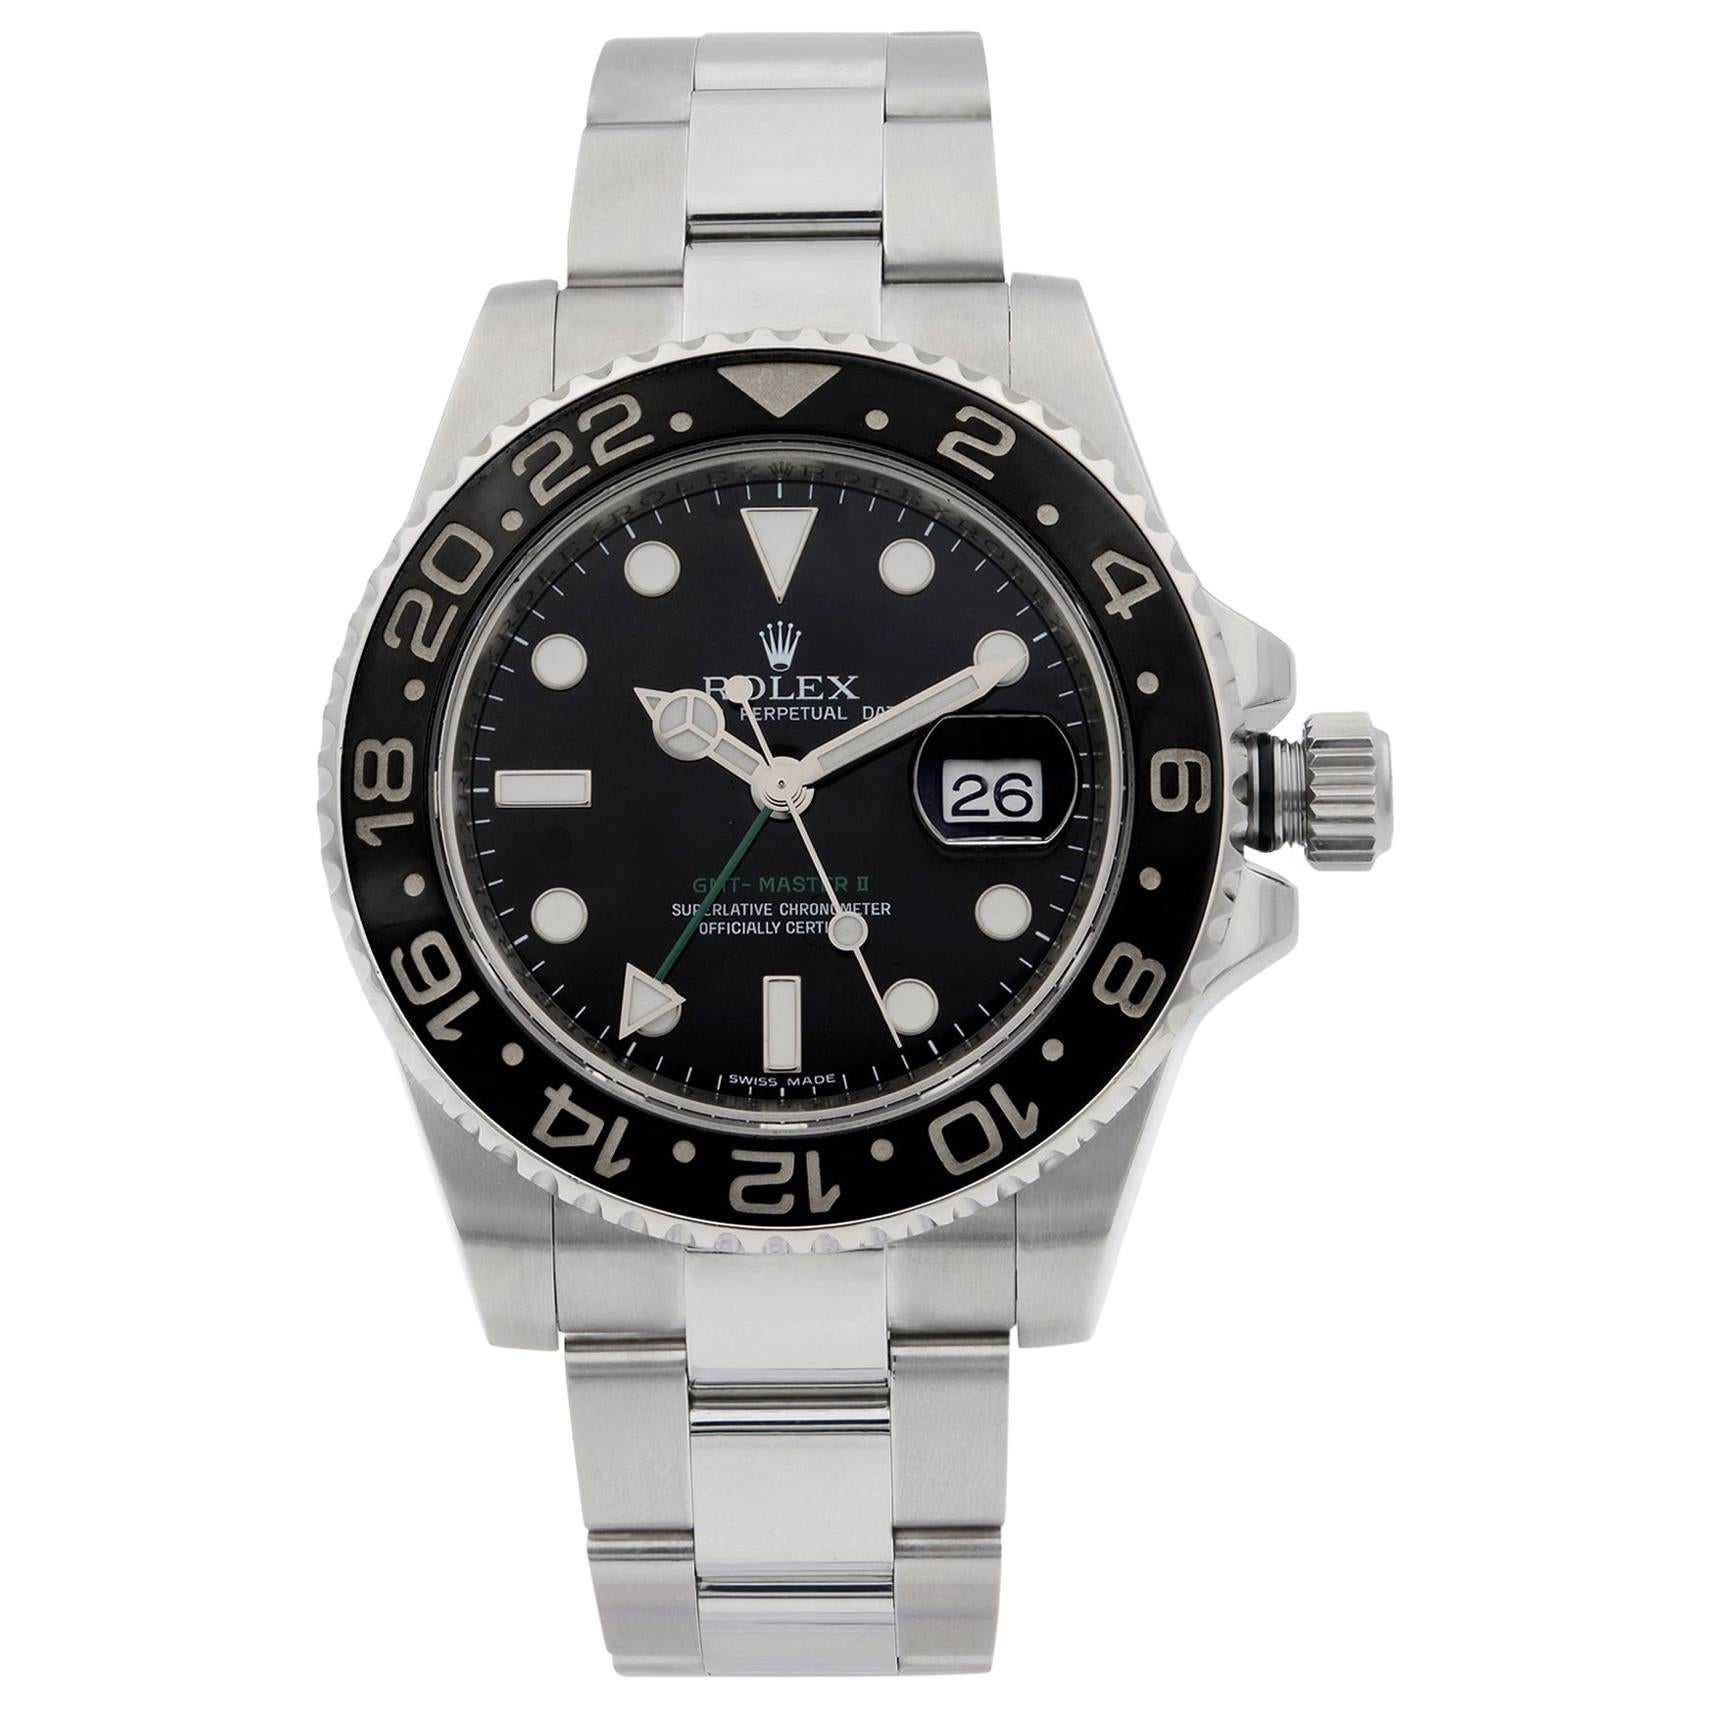 Rolex GMT-Master II Stainless Steel Black Dial Automatic Men's Watch 116710N